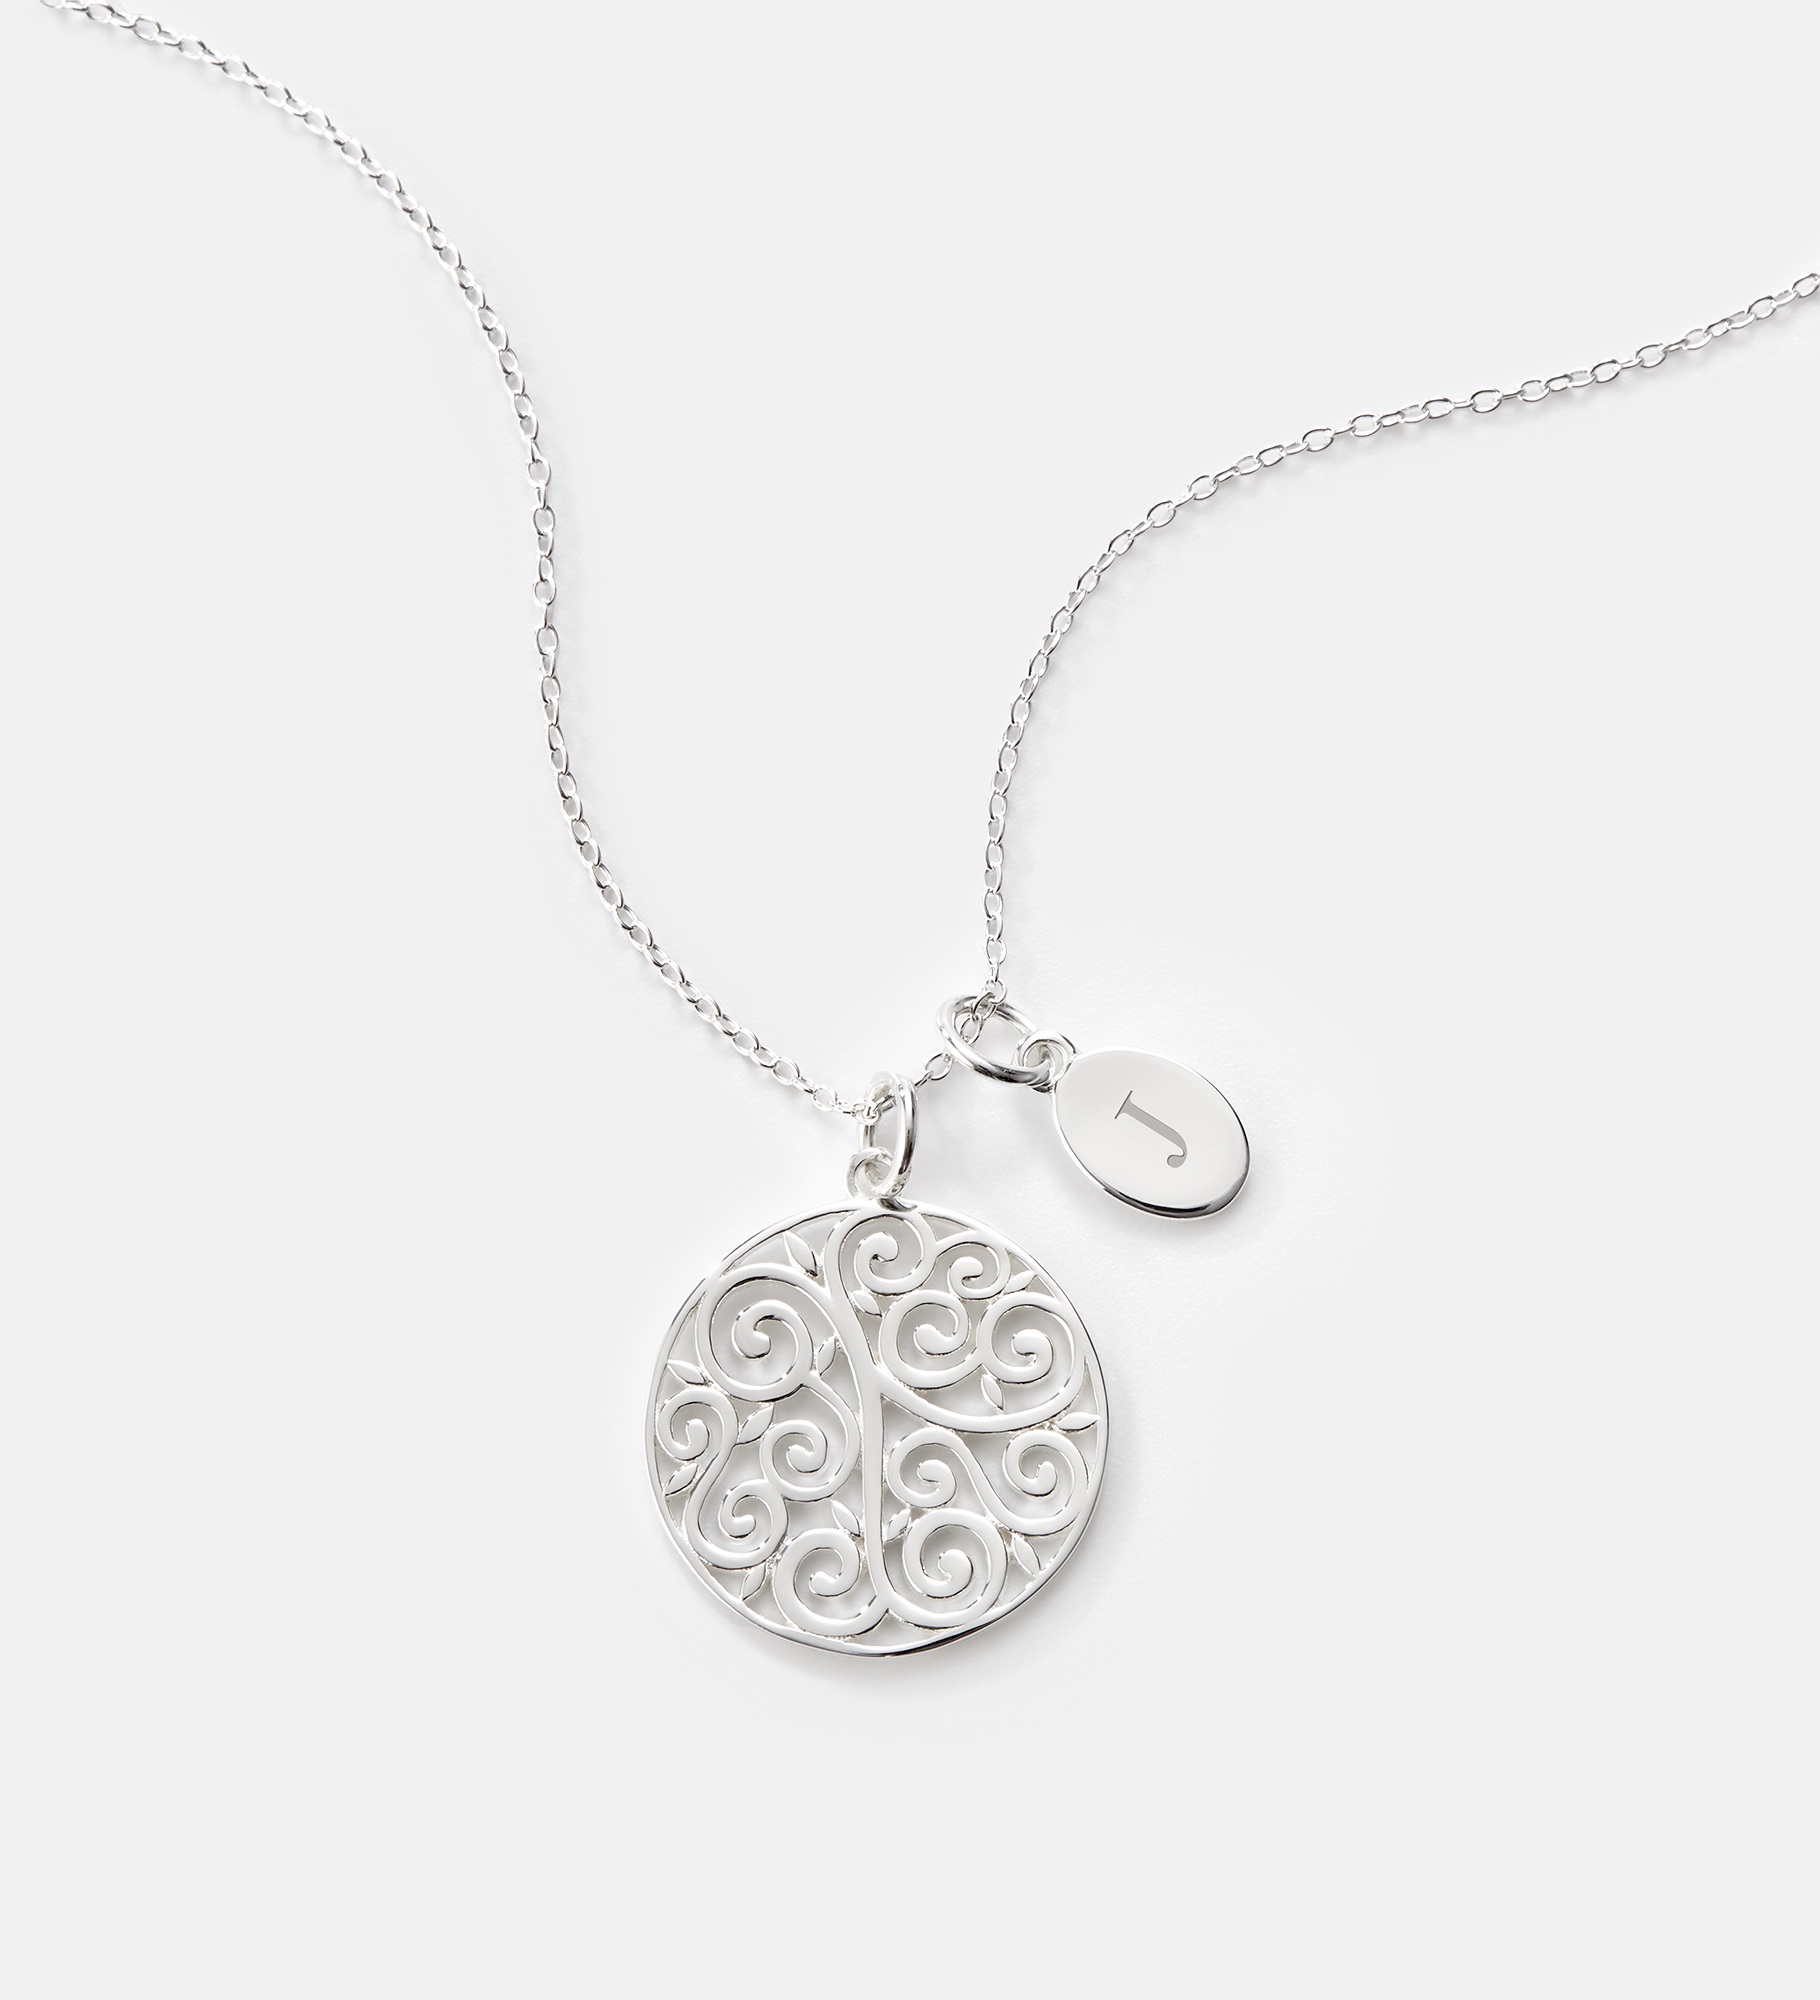  Engraved Sterling Silver Filigree Round Necklace